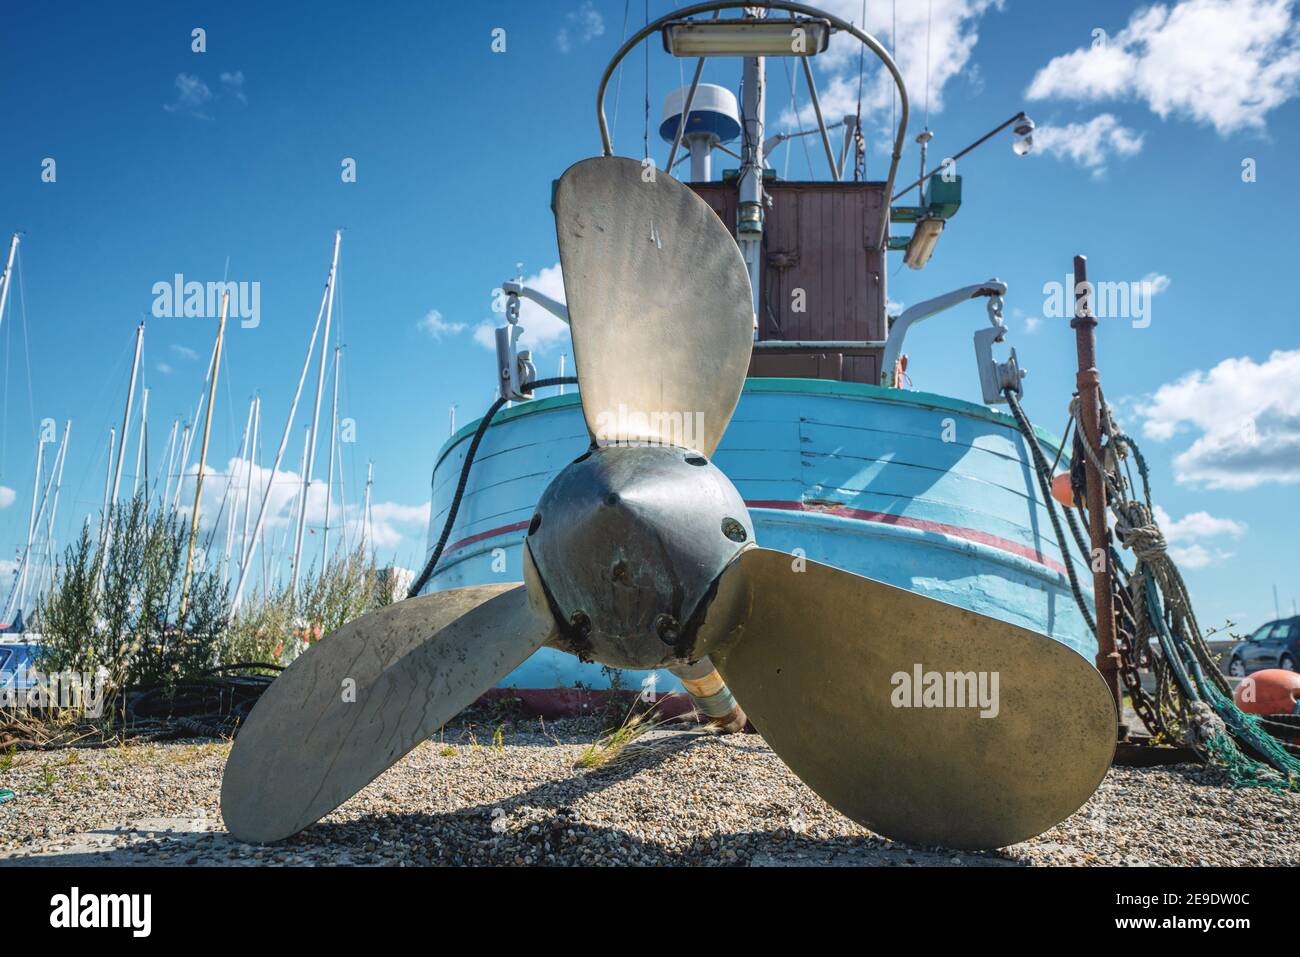 Fishing boat with a large propeller on land at a marine harbor in